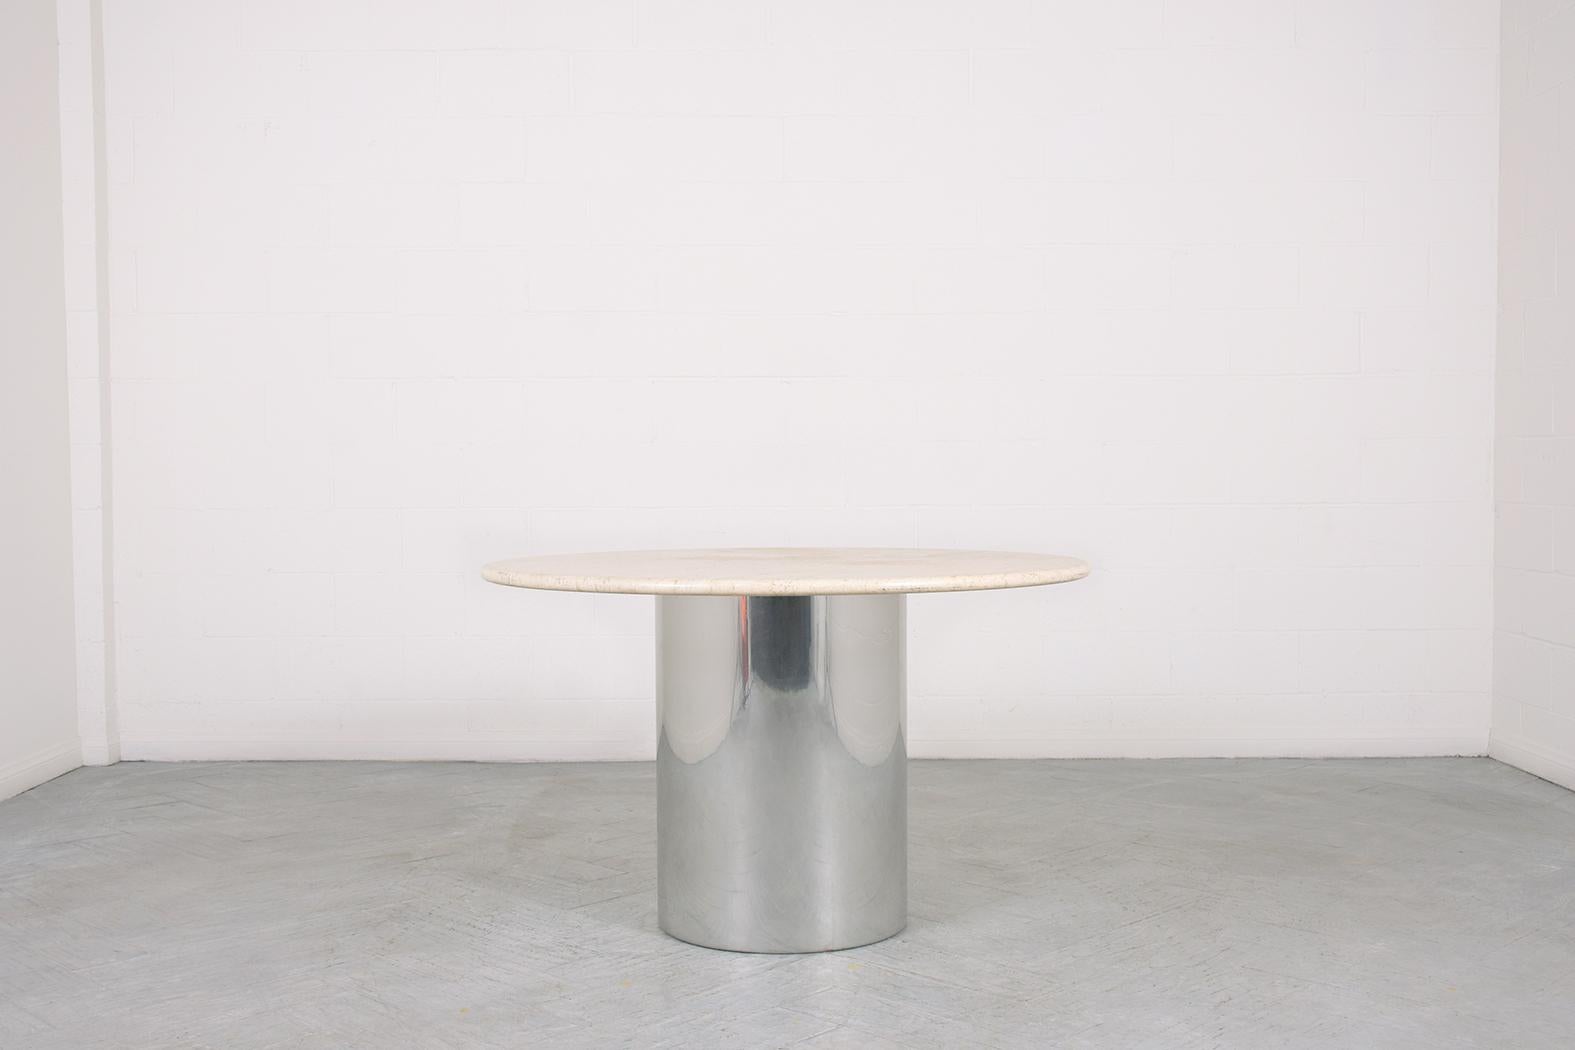 This extraordinary modern 1970s dining table is in great condition beautifully crafted out of steel & travertine marble and newly restored by our professional craftsmen team. This sleek mid-century dining room table features a circular Italian